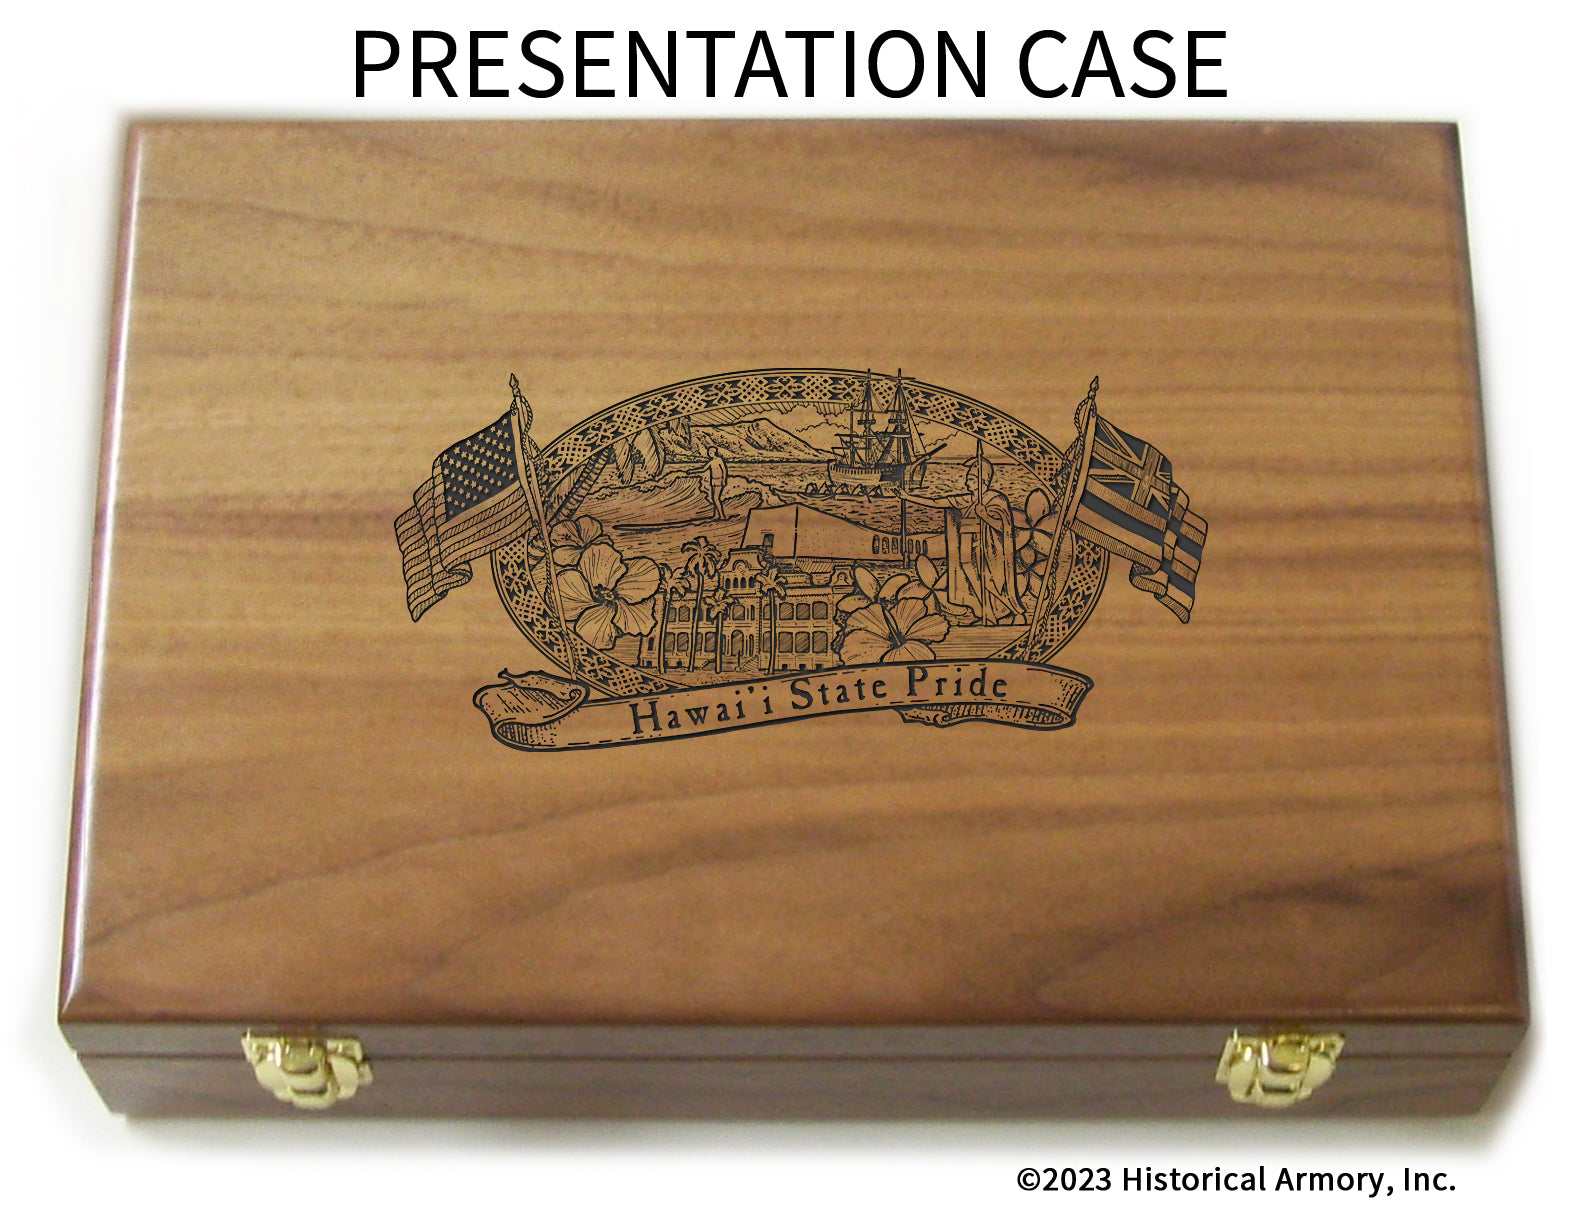 Hawaii State Pride Limited Edition Engraved 1911 Presentation Case